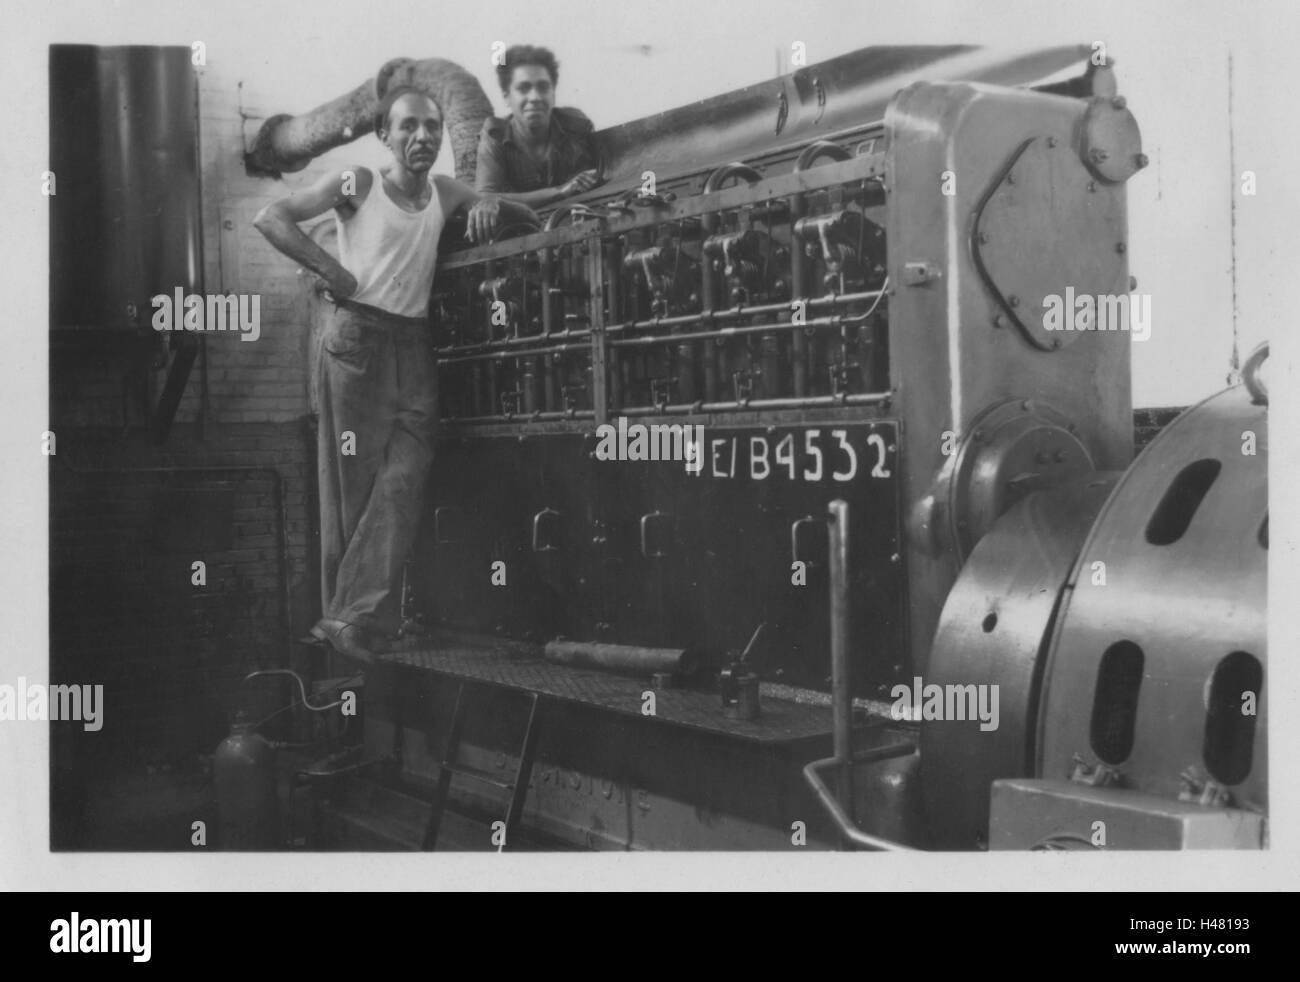 Unidentified Egyptian engineers standing next to a Mirrlees  Blackstone diesel generator. Photo taken in 10 Base Ordnance Depot Royal Army Ordnance Corps (RAOC) camp at Geneifa Ismailia area near the Suez Canal 1952 Egypt Stock Photo